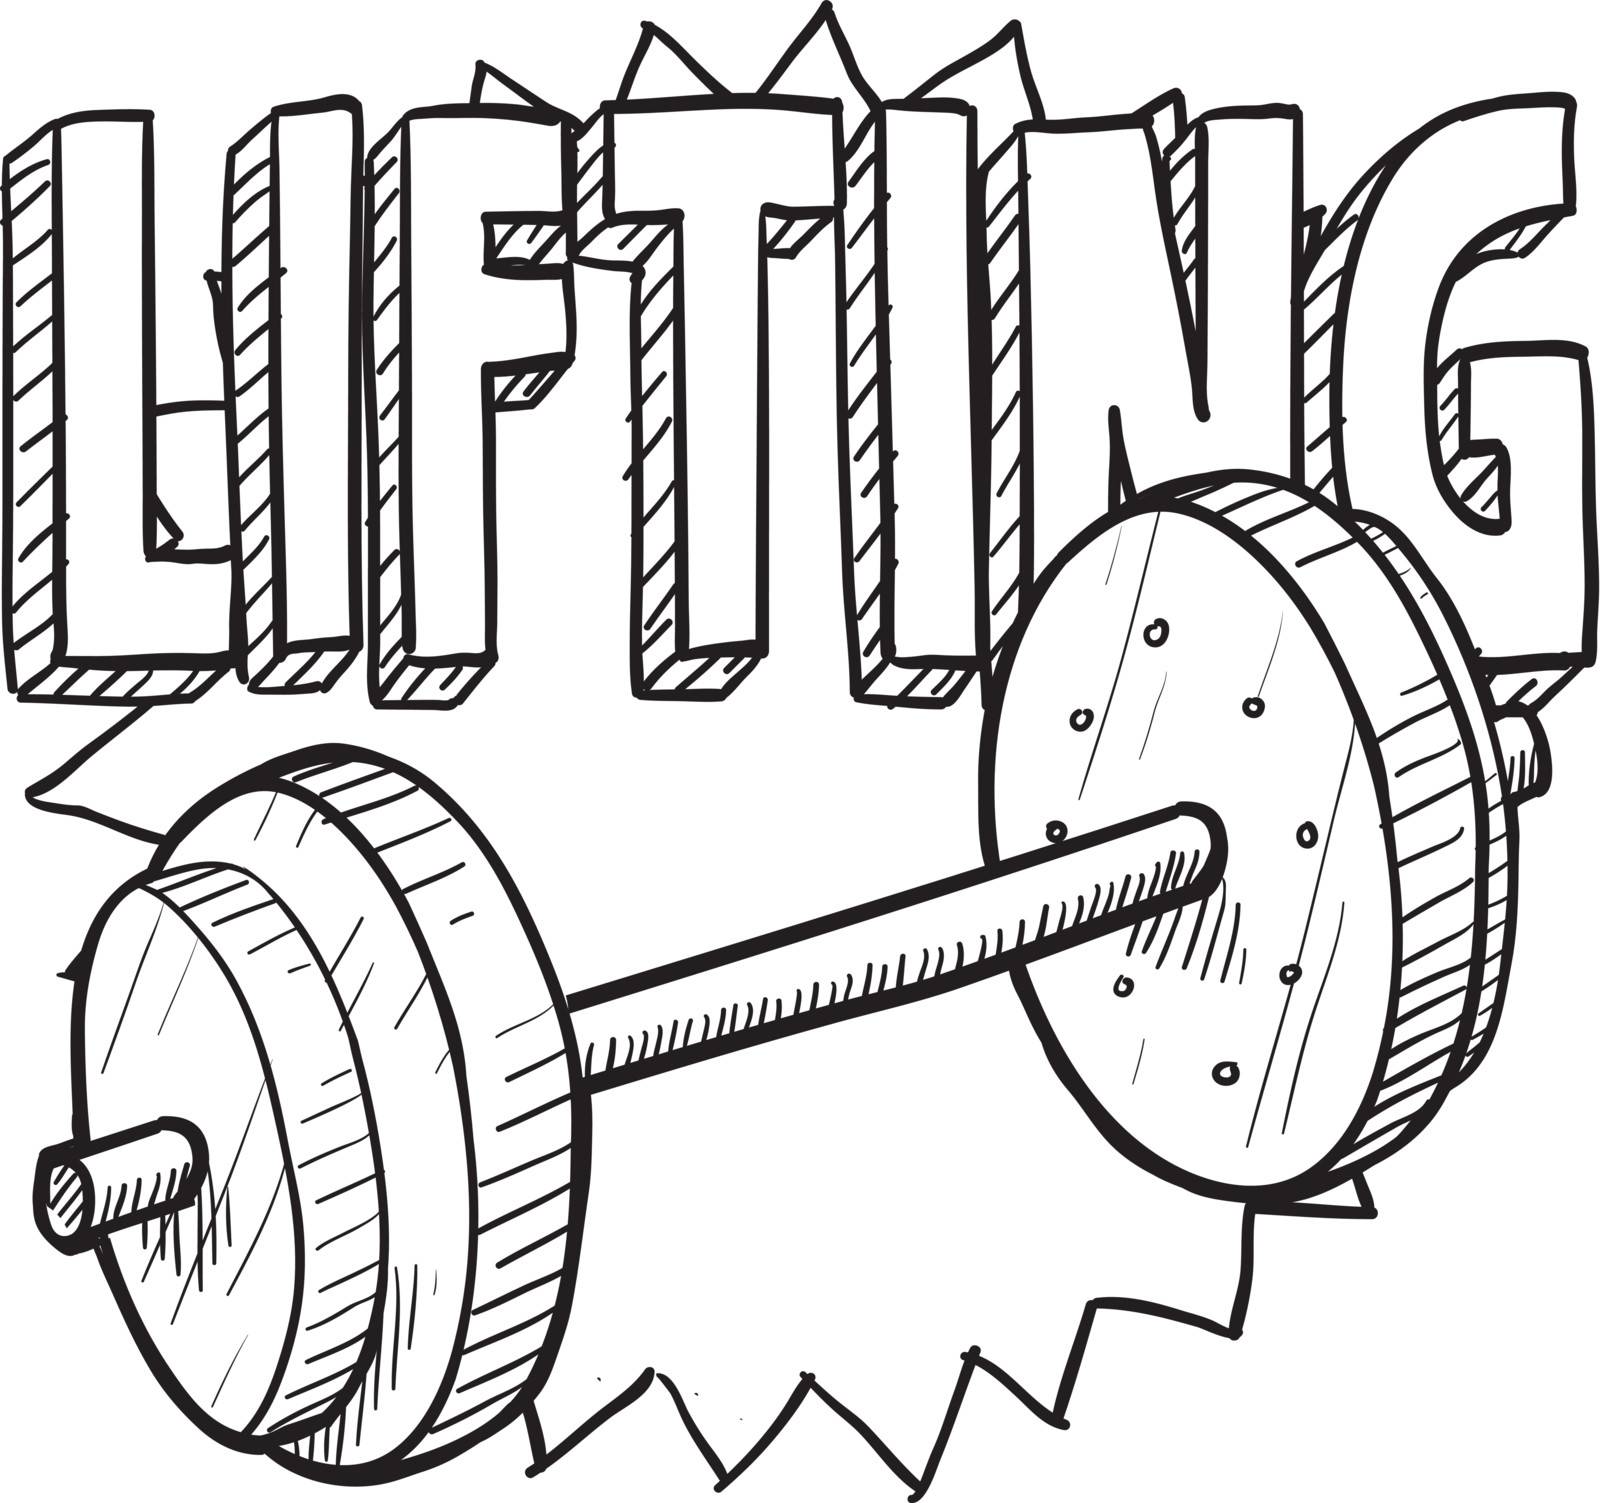 Doodle style weightlifting sports illustration. Includes text and barbells.